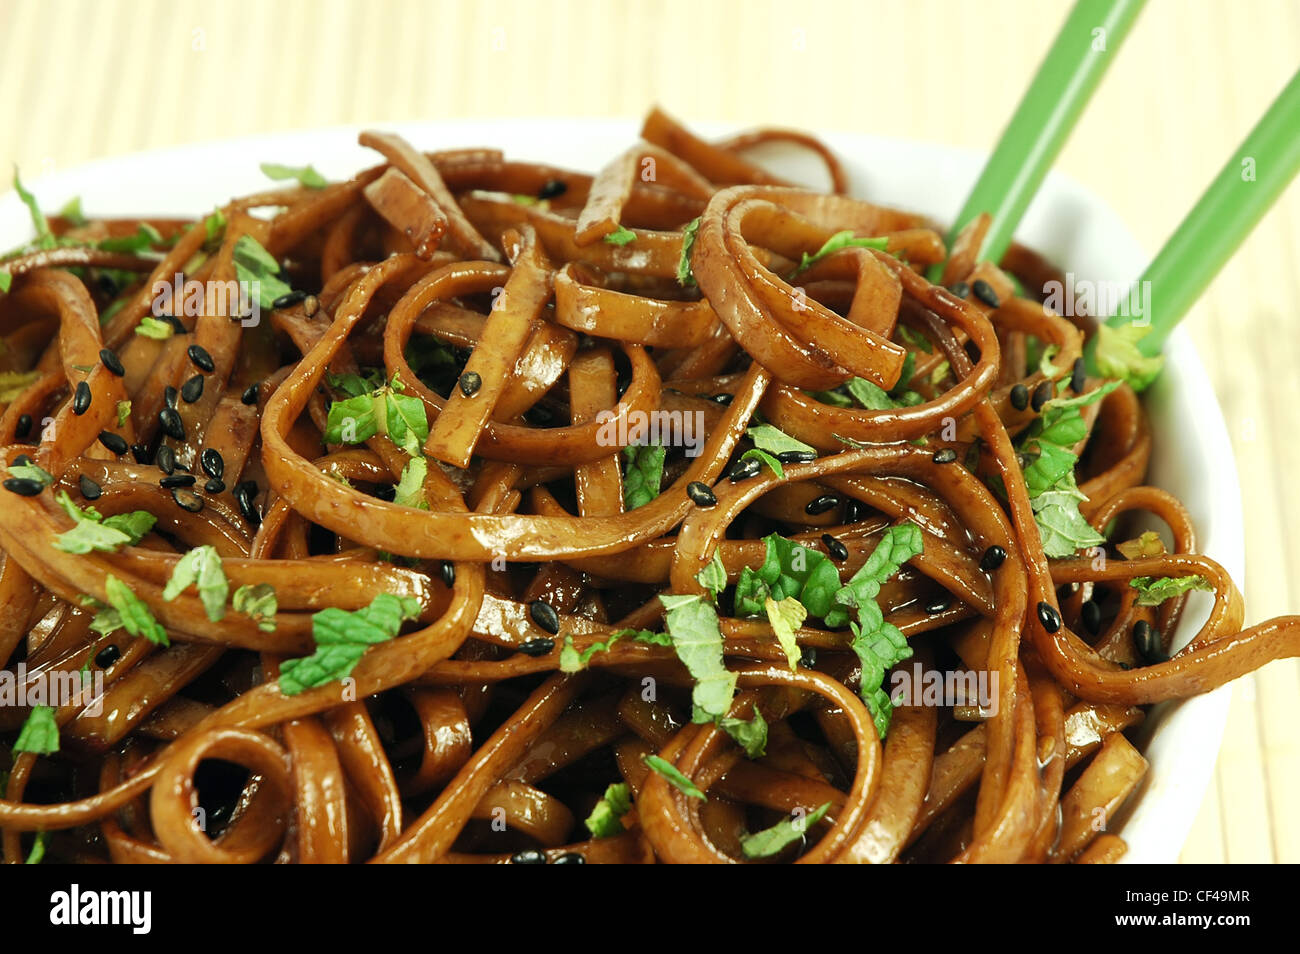 Bowl of stir fried udon noodles garnished with black sesame seeds and fresh mint with green chopsticks Stock Photo